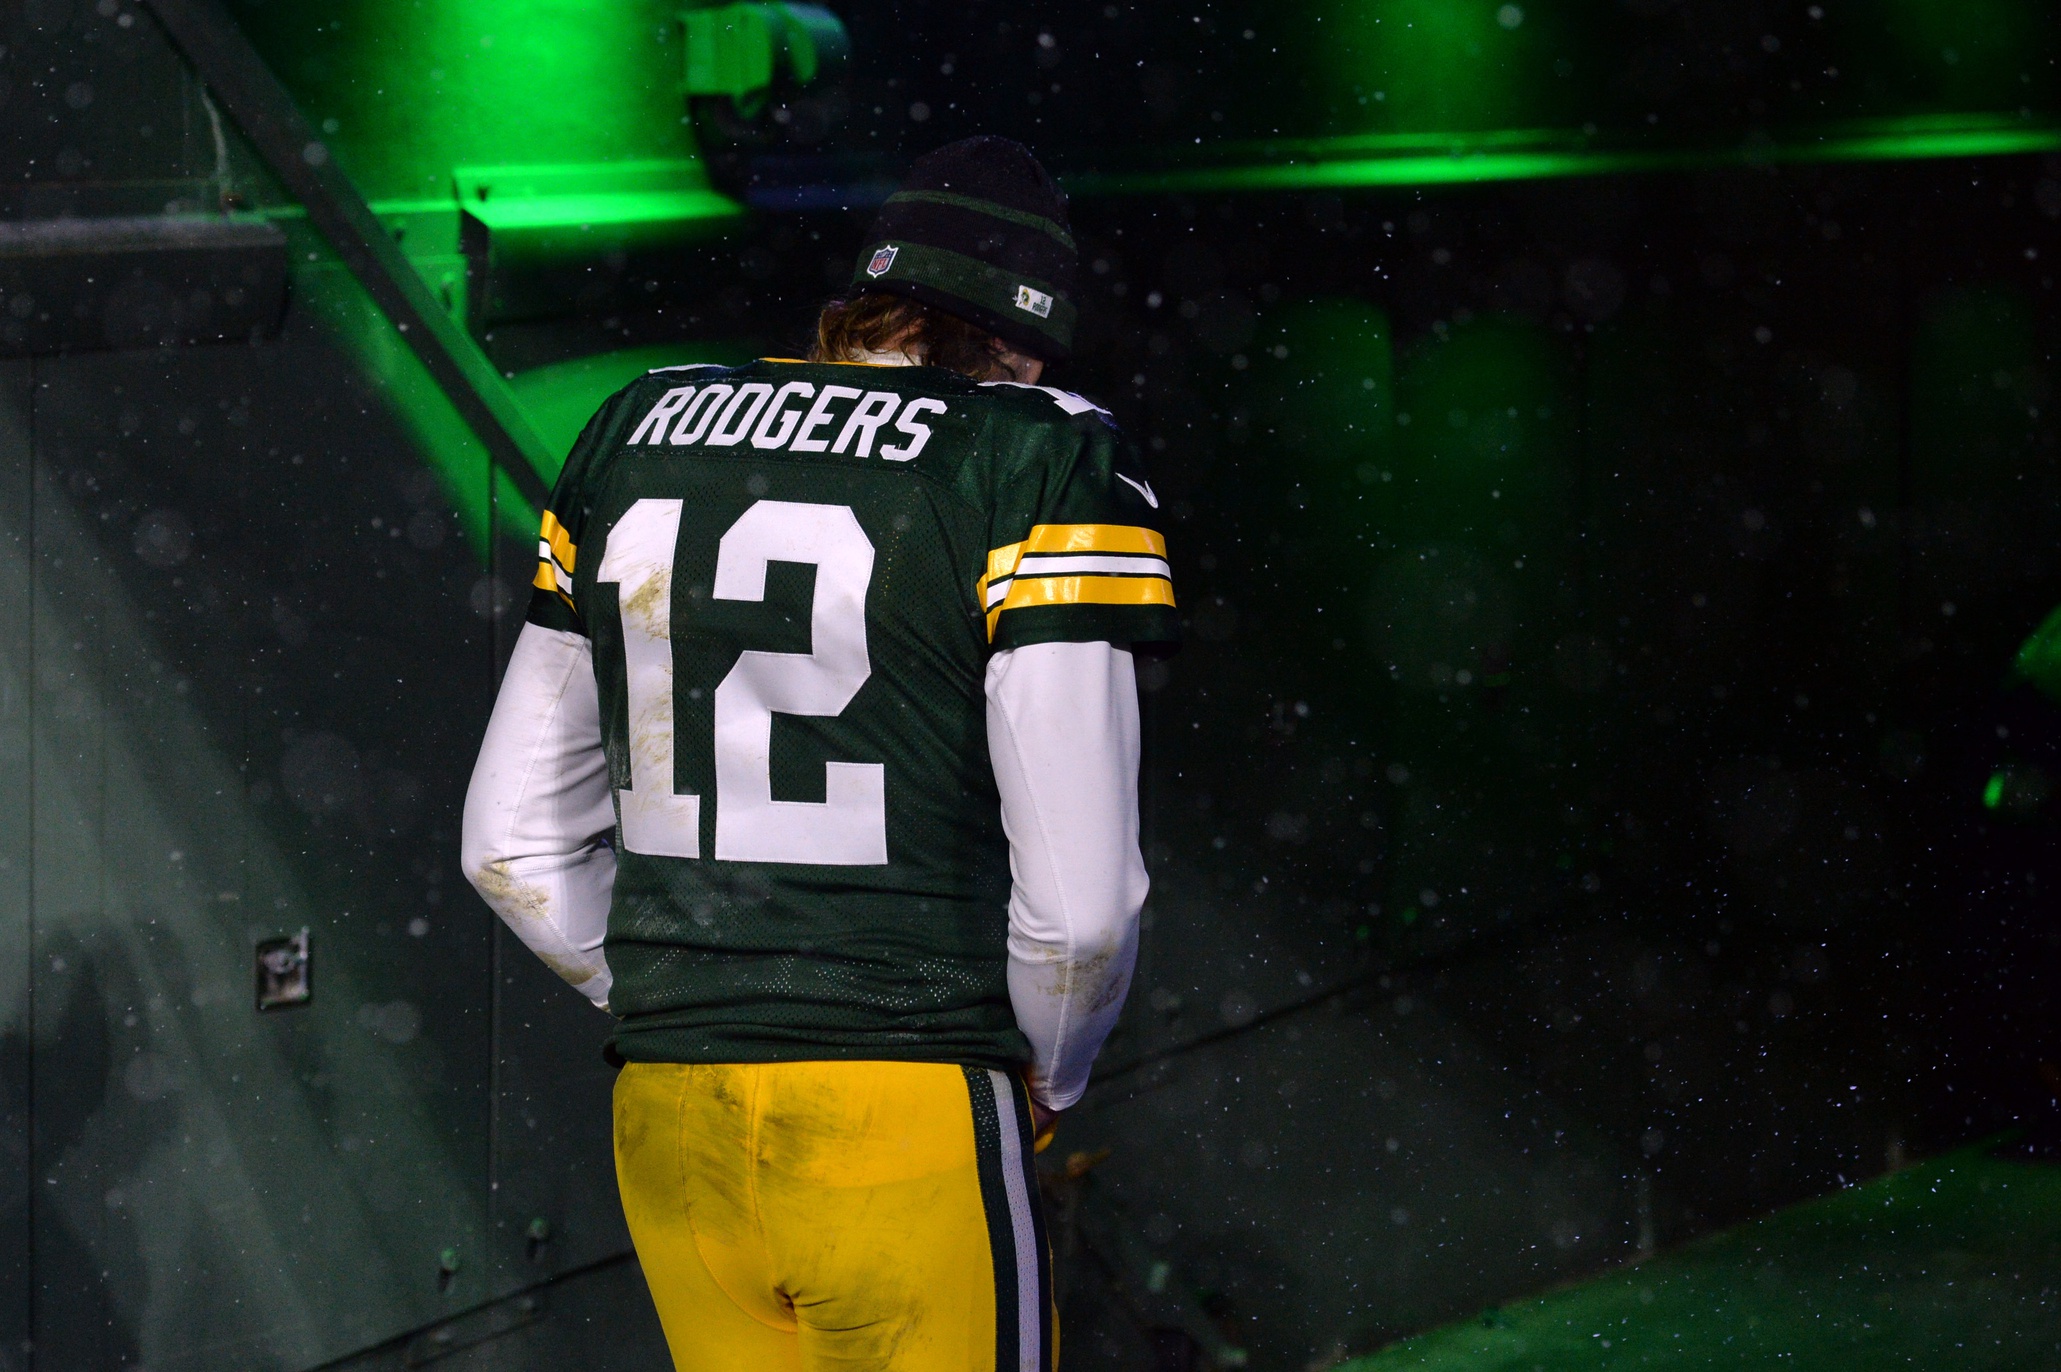 RUMOR: Jets-Packers Aaron Rodgers trade buzz gains more steam